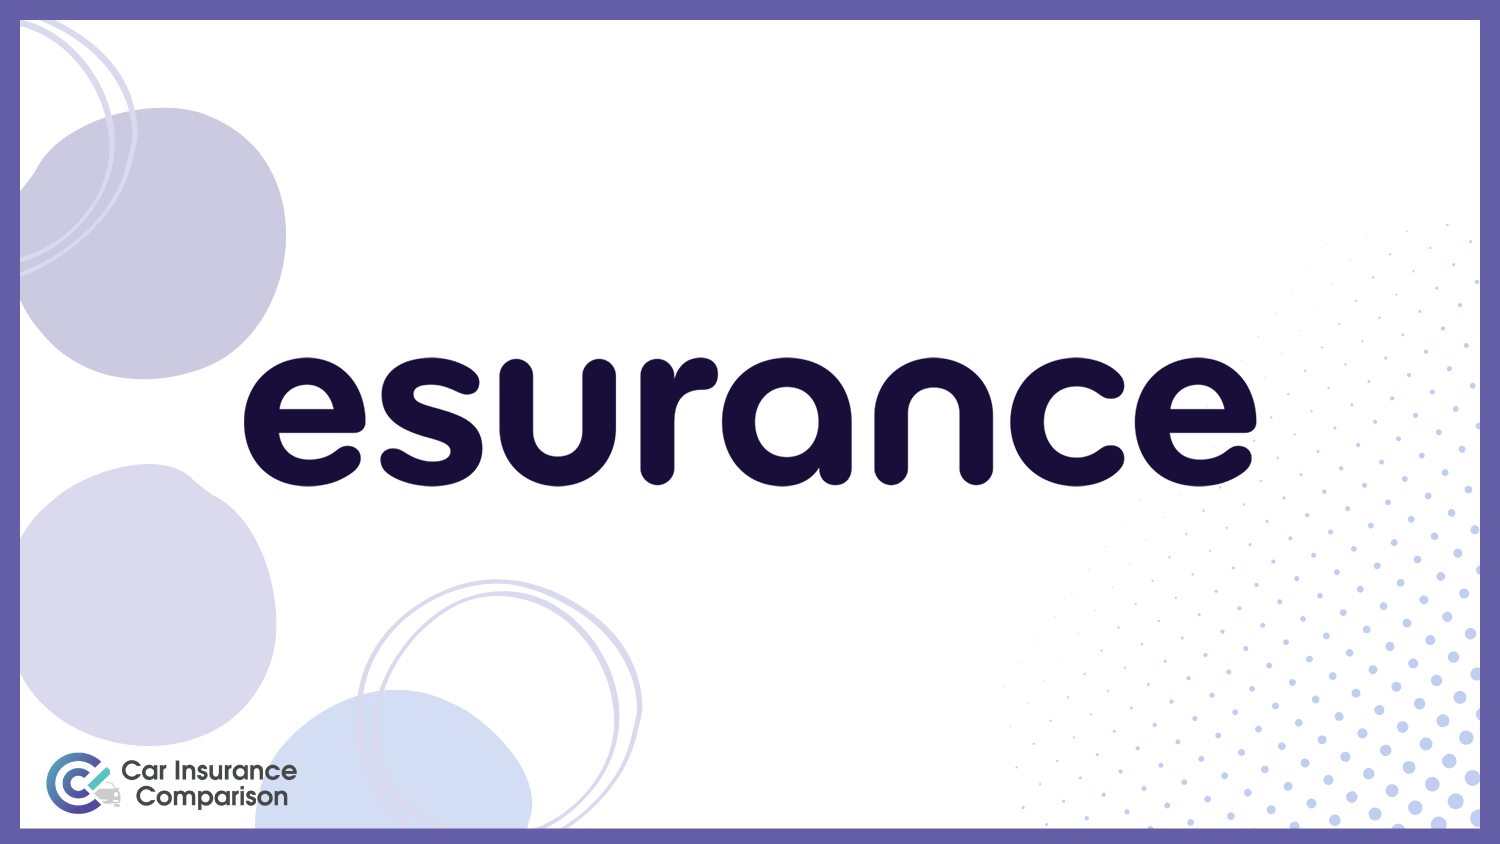 Esurance: Compare Car Insurance Rates for Inexperienced Drivers